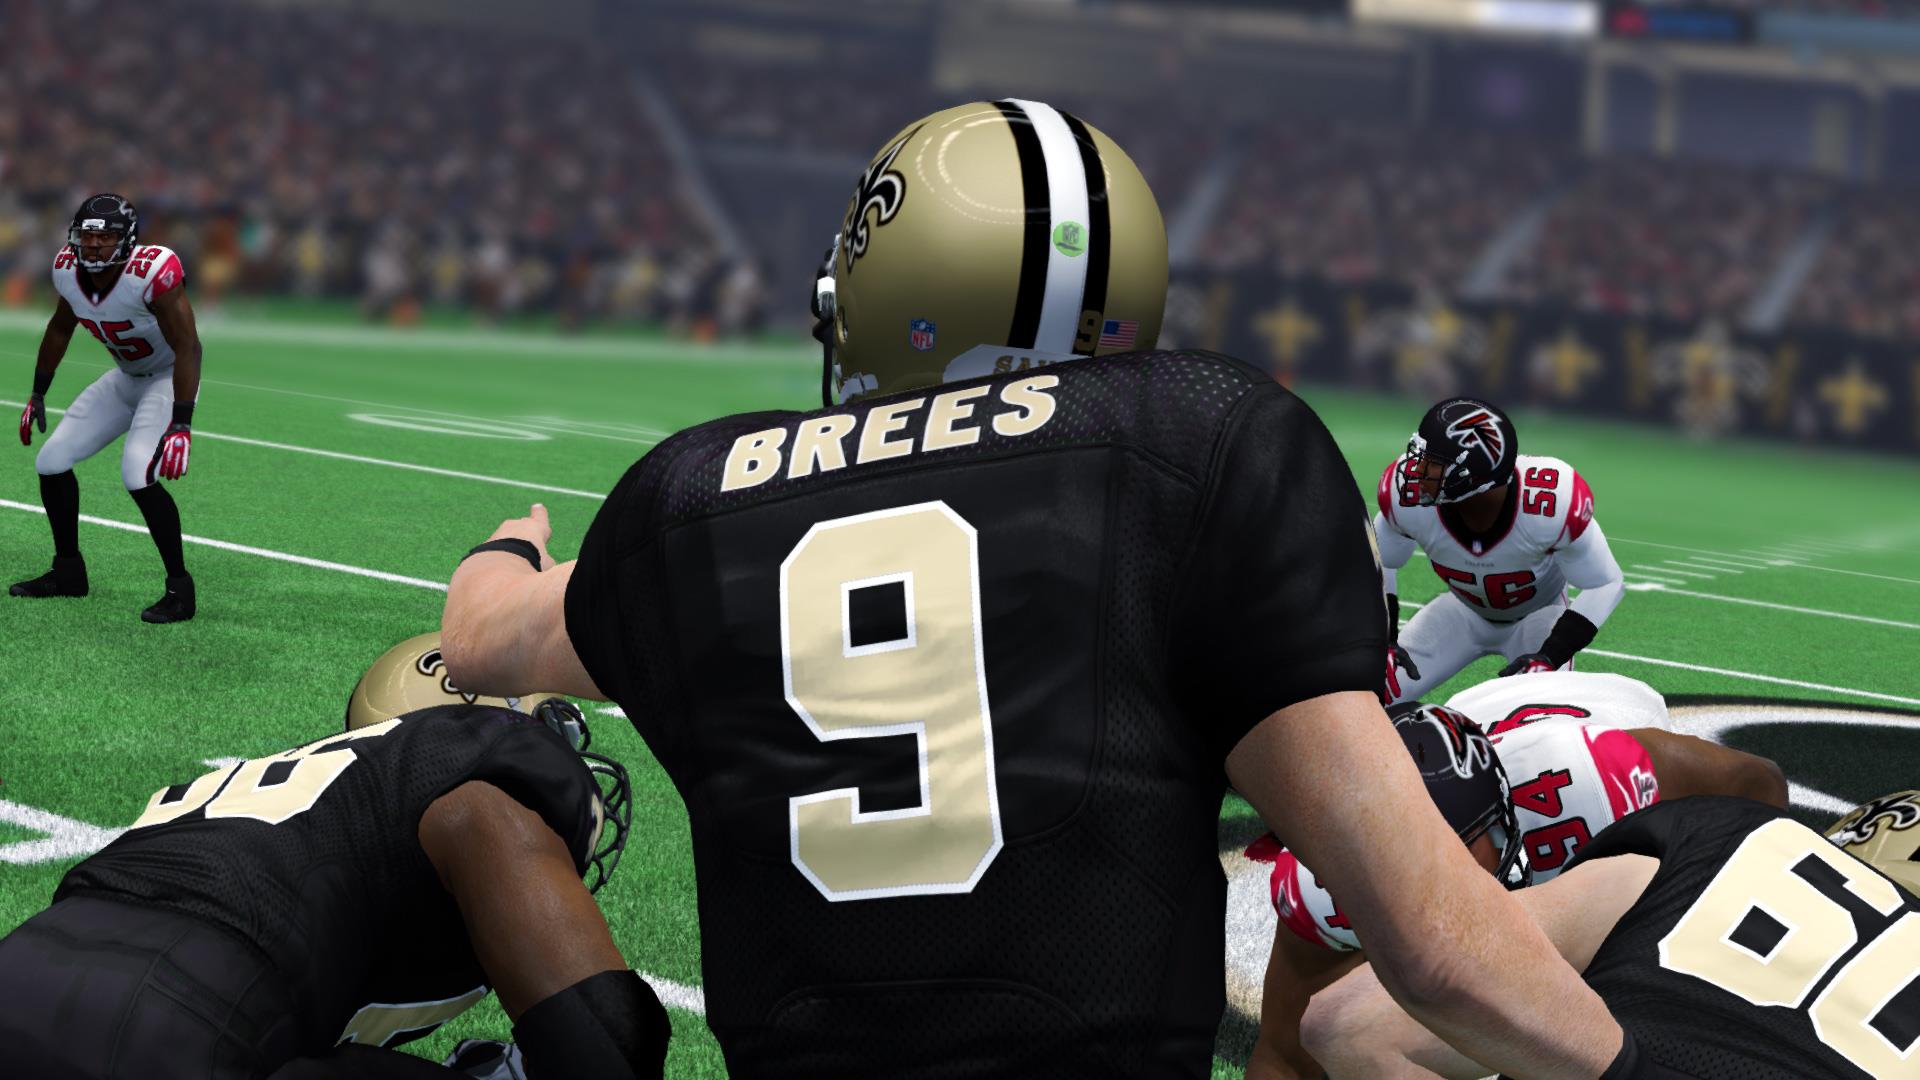 Drew Brees Wallpaper Pictures